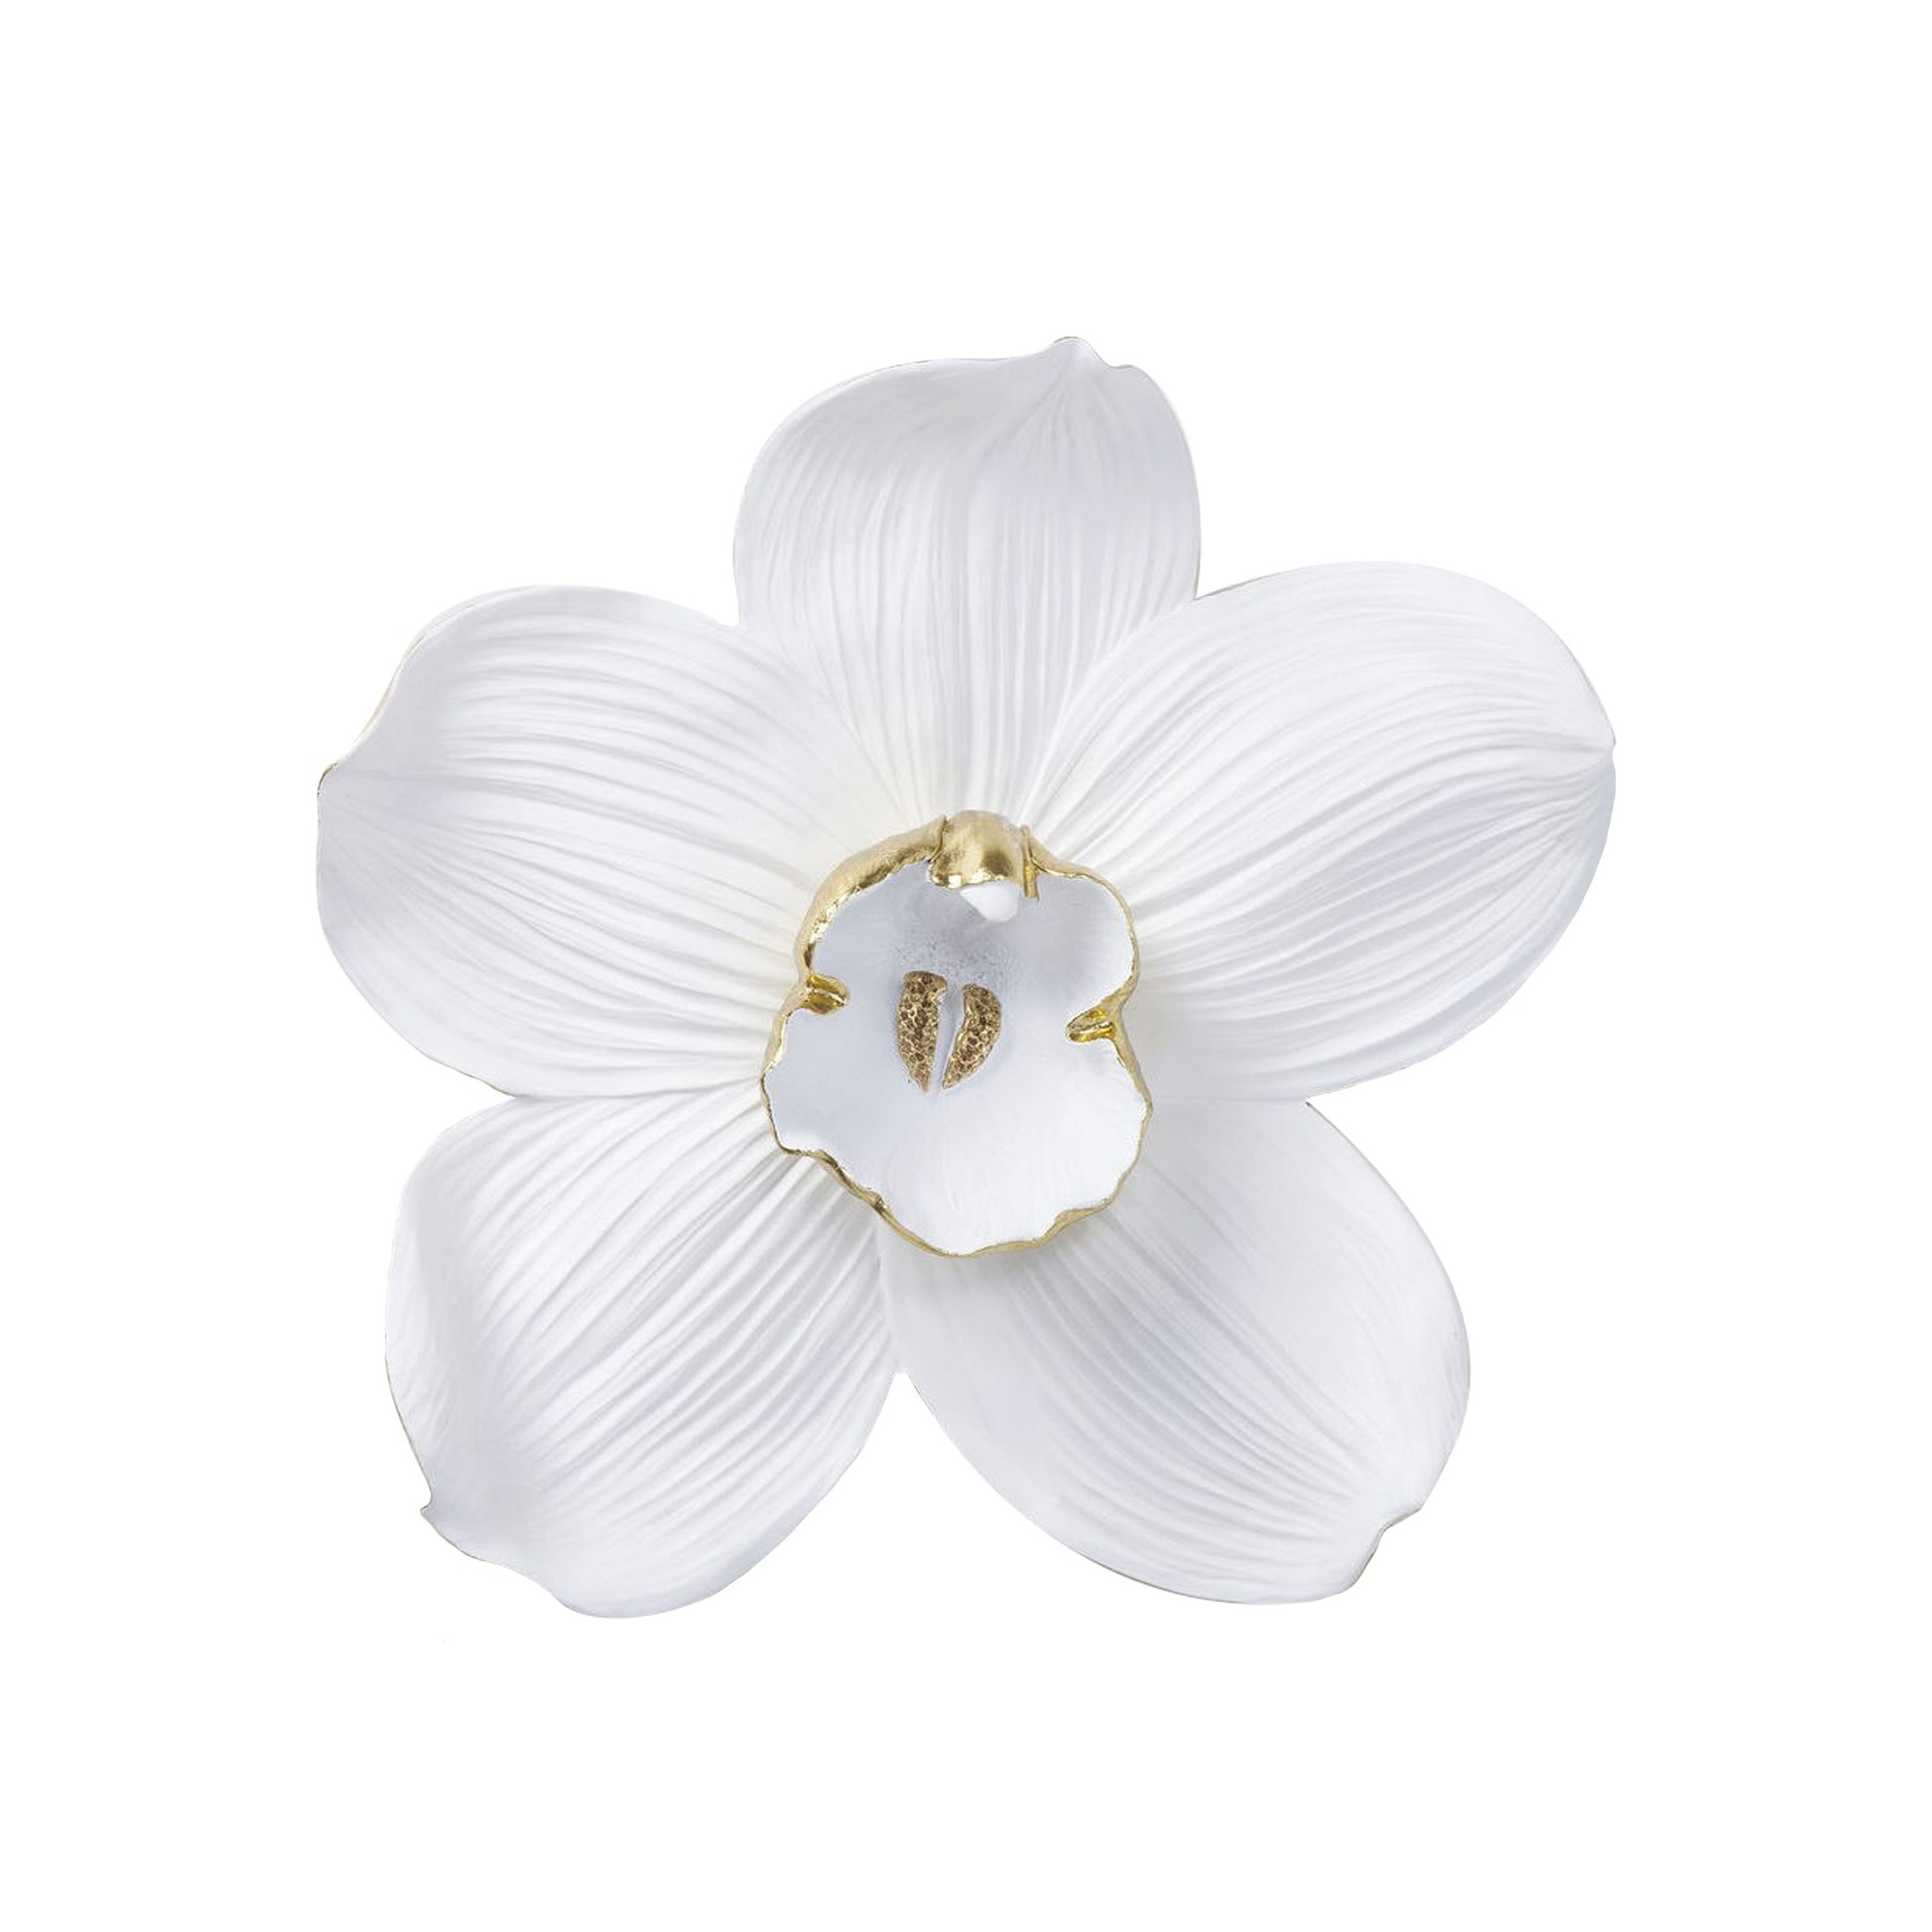 Wall Decoration Orchid White 54cm Kare Design